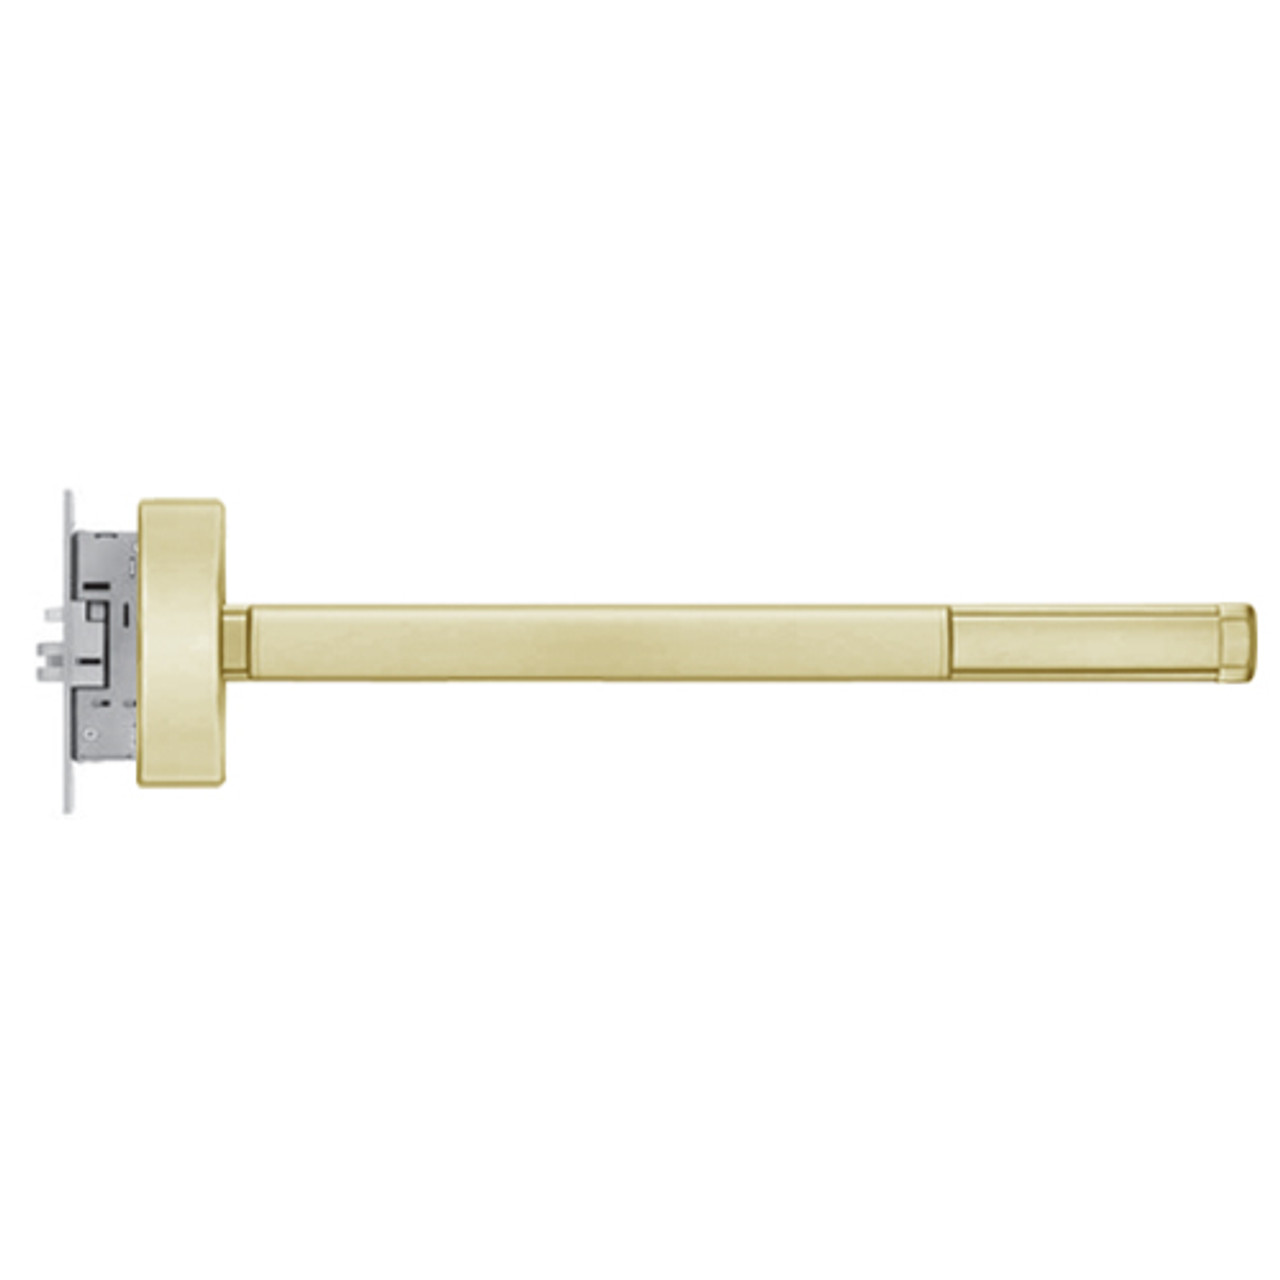 ELR2302-RHR-606-36 PHI 2300 Series Apex Mortise Exit Device with Electric Latch Retraction Prepped for Dummy Trim in Satin Brass Finish